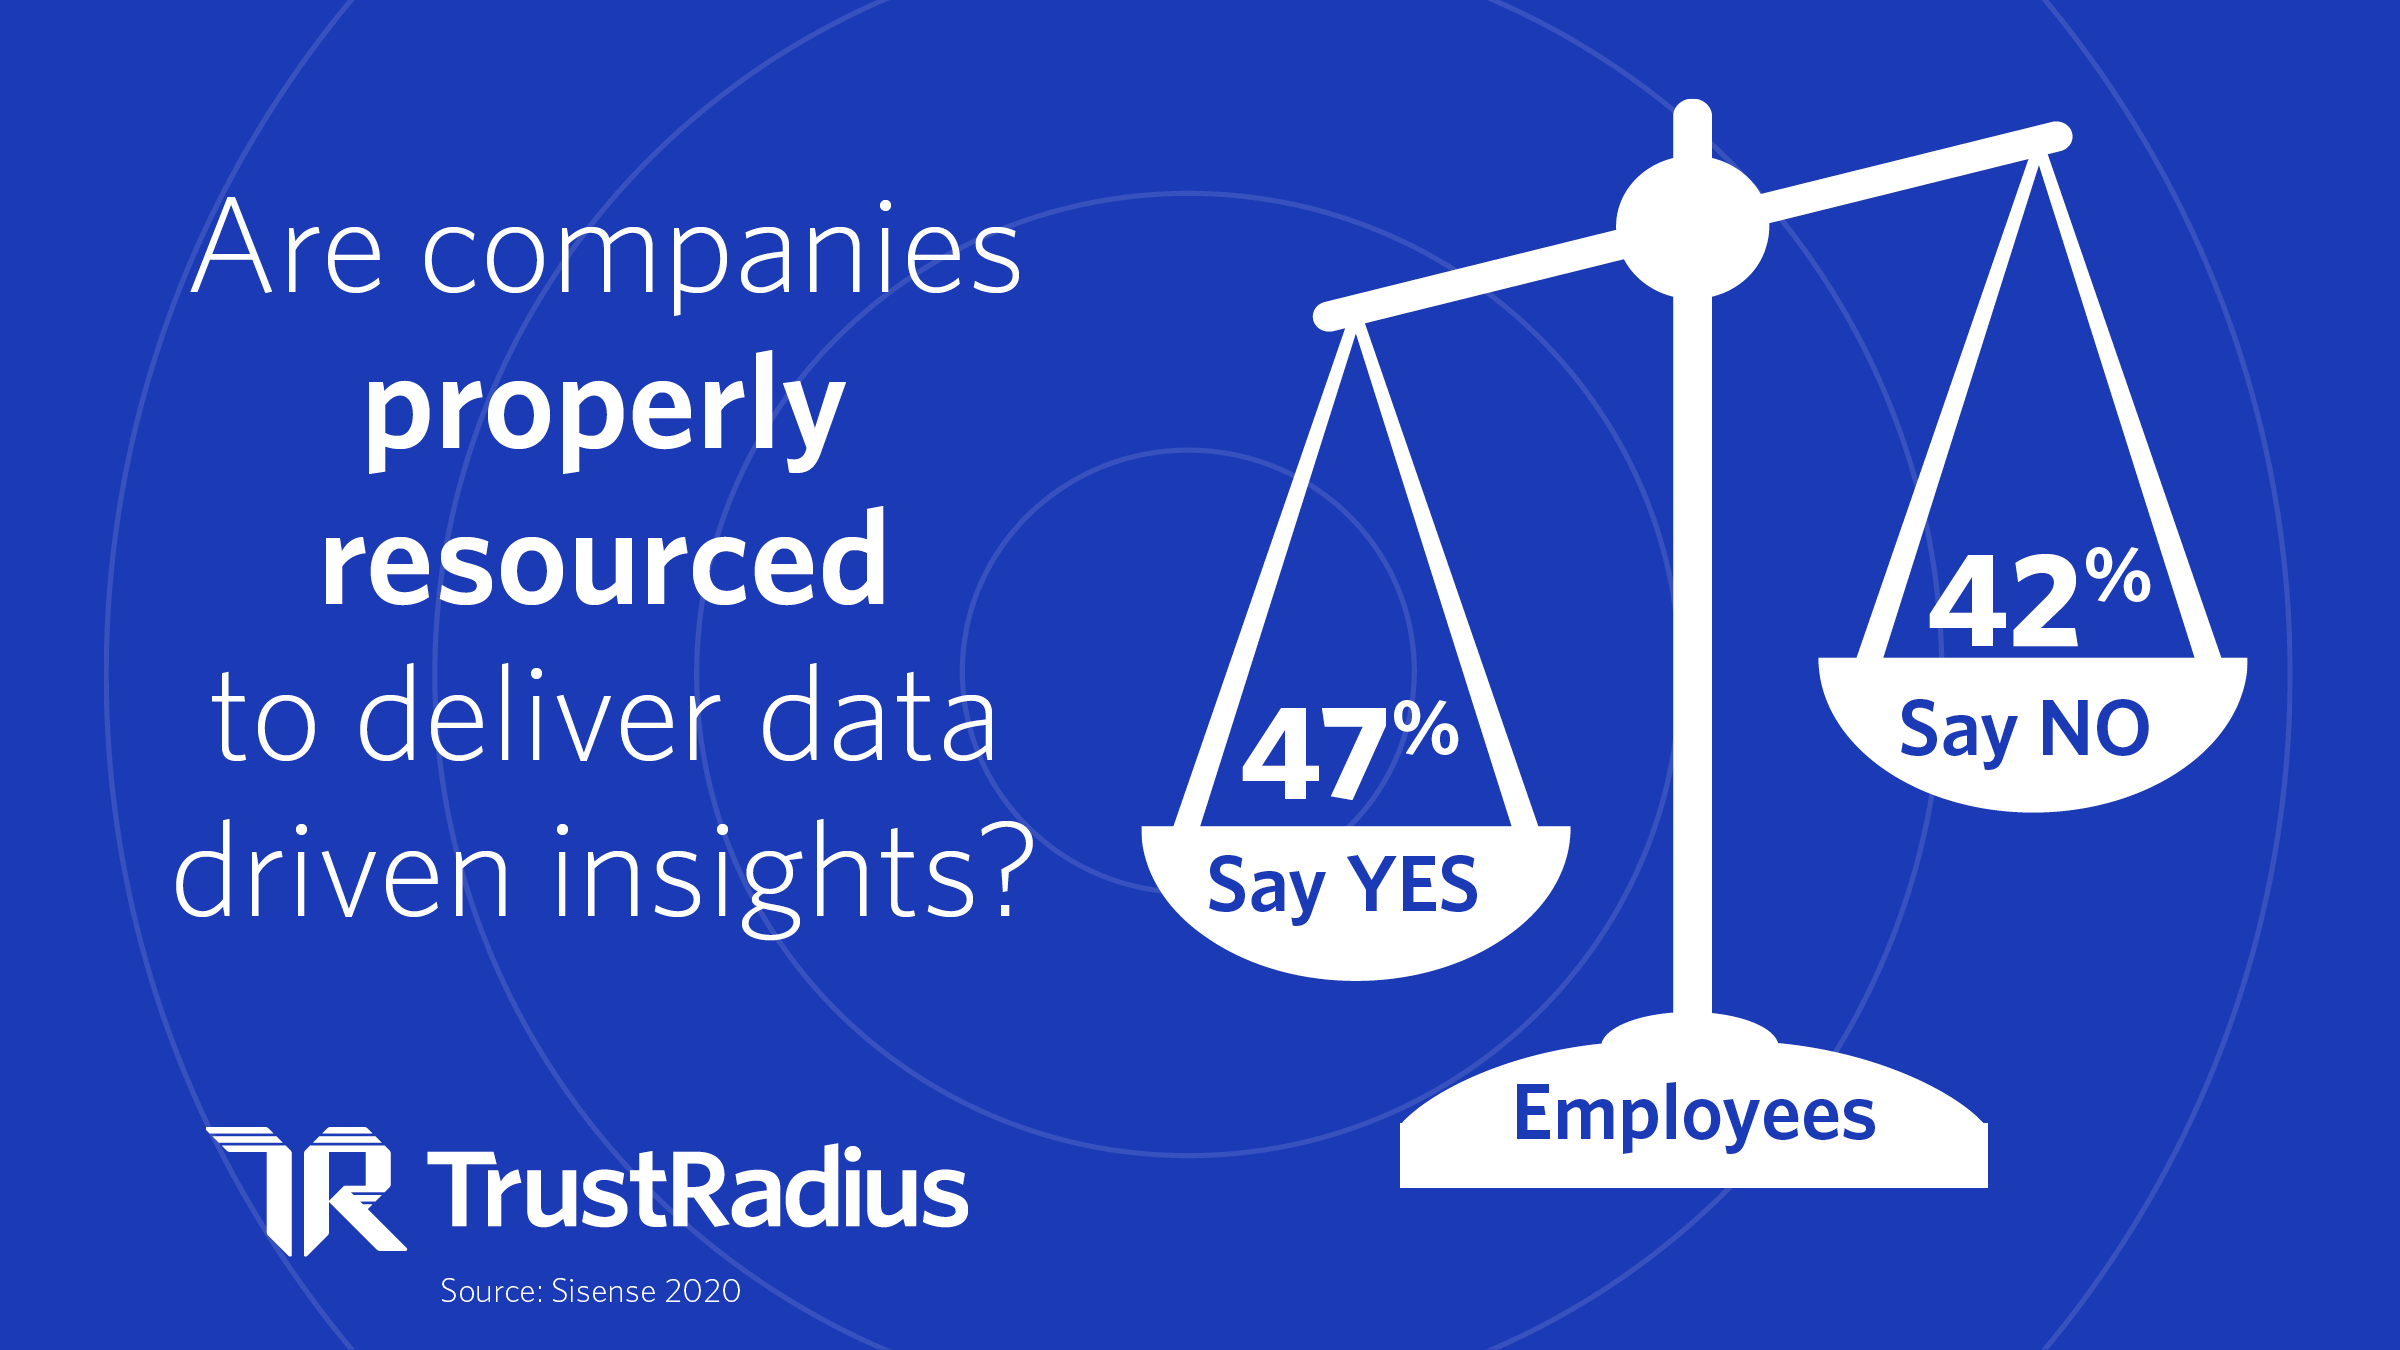 Are companies properly resourced to deliver data-driven insights?